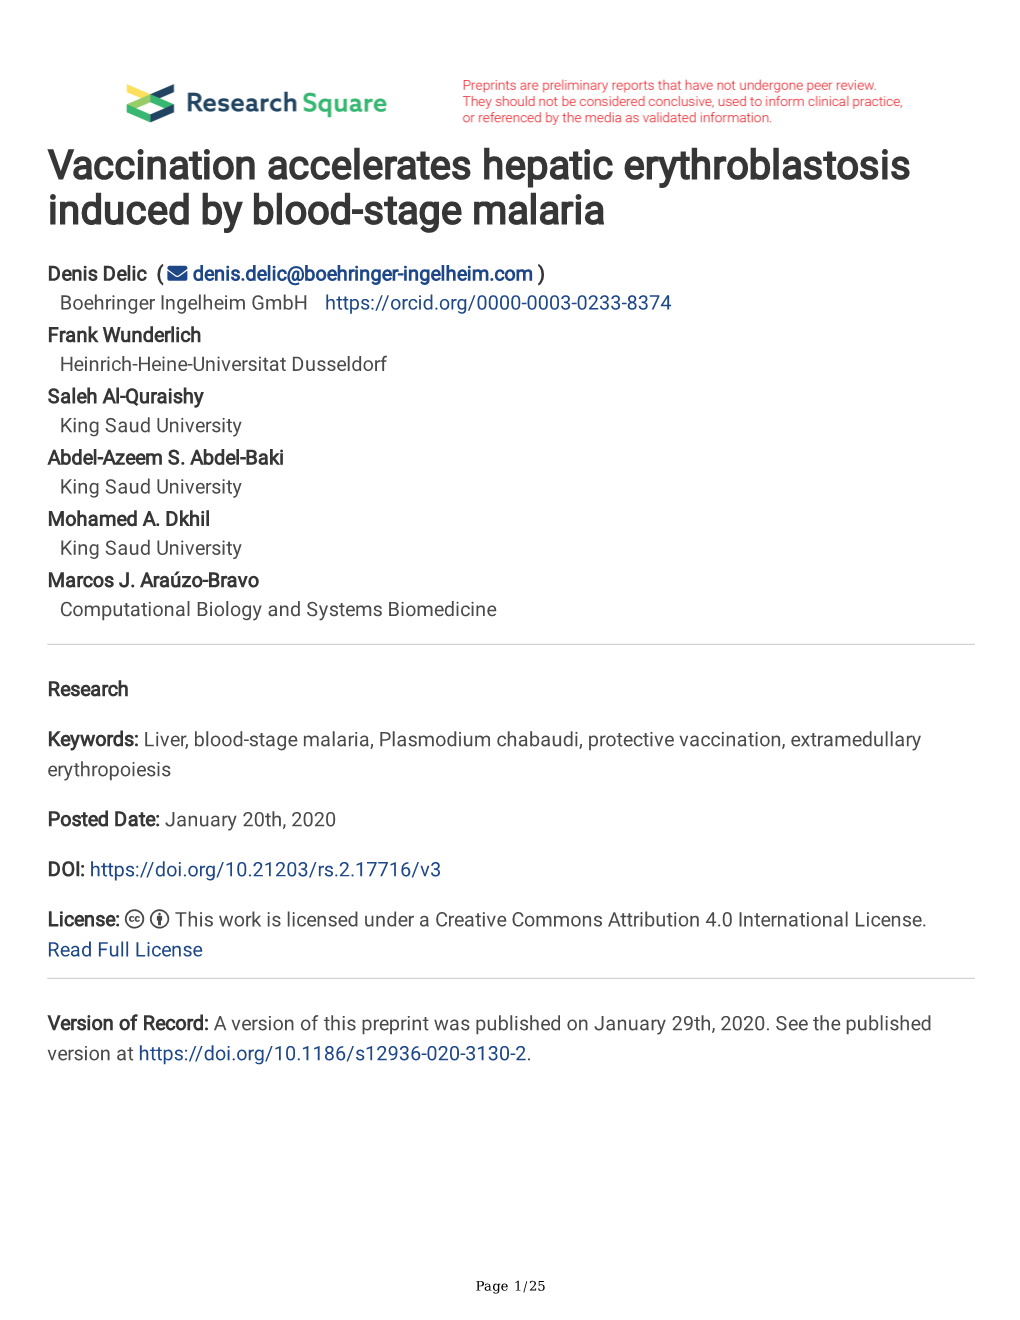 Vaccination Accelerates Hepatic Erythroblastosis Induced by Blood-Stage Malaria